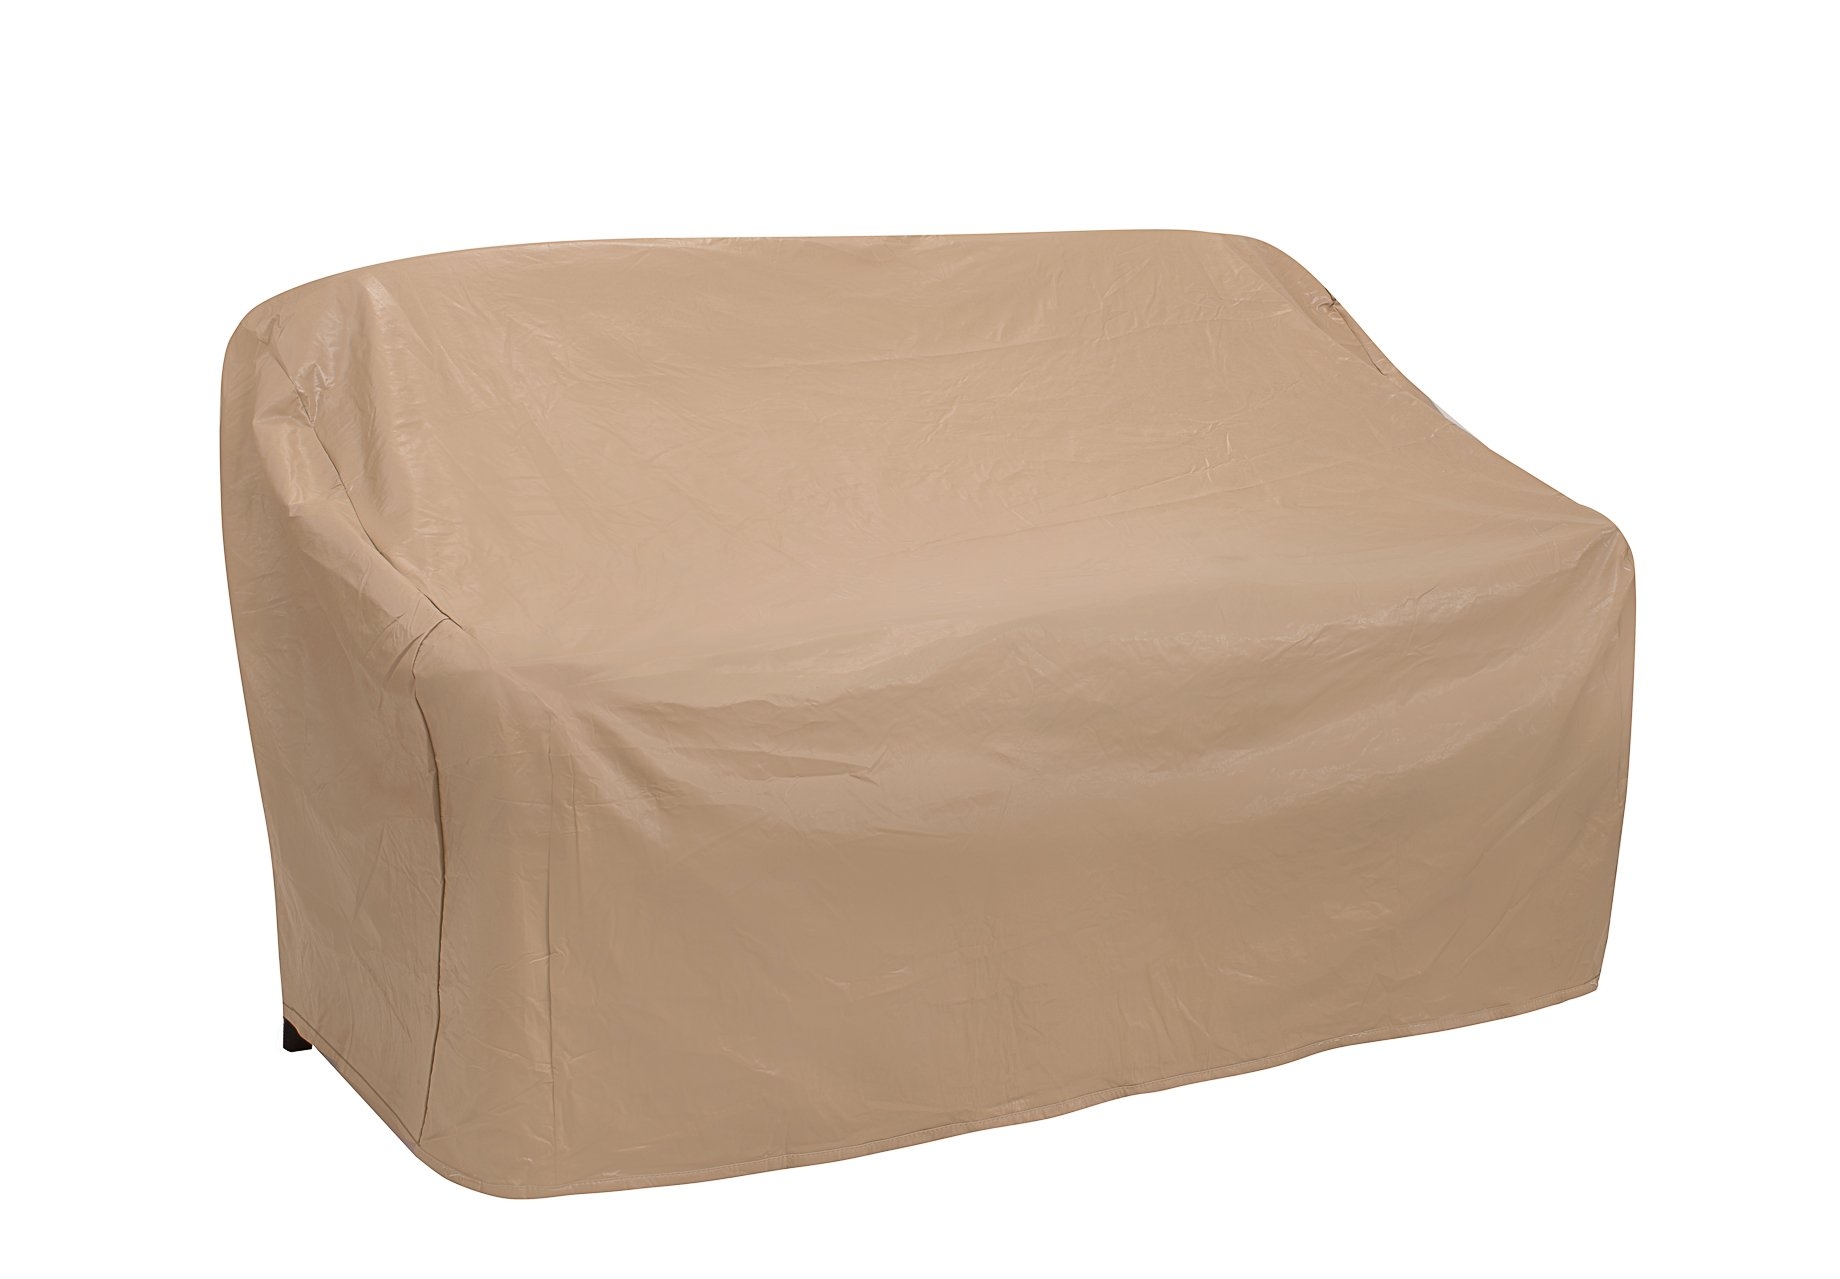 Protective Covers Weatherproof 3 Seat Wicker/Rattan Sofa Cover, X Large, Tan